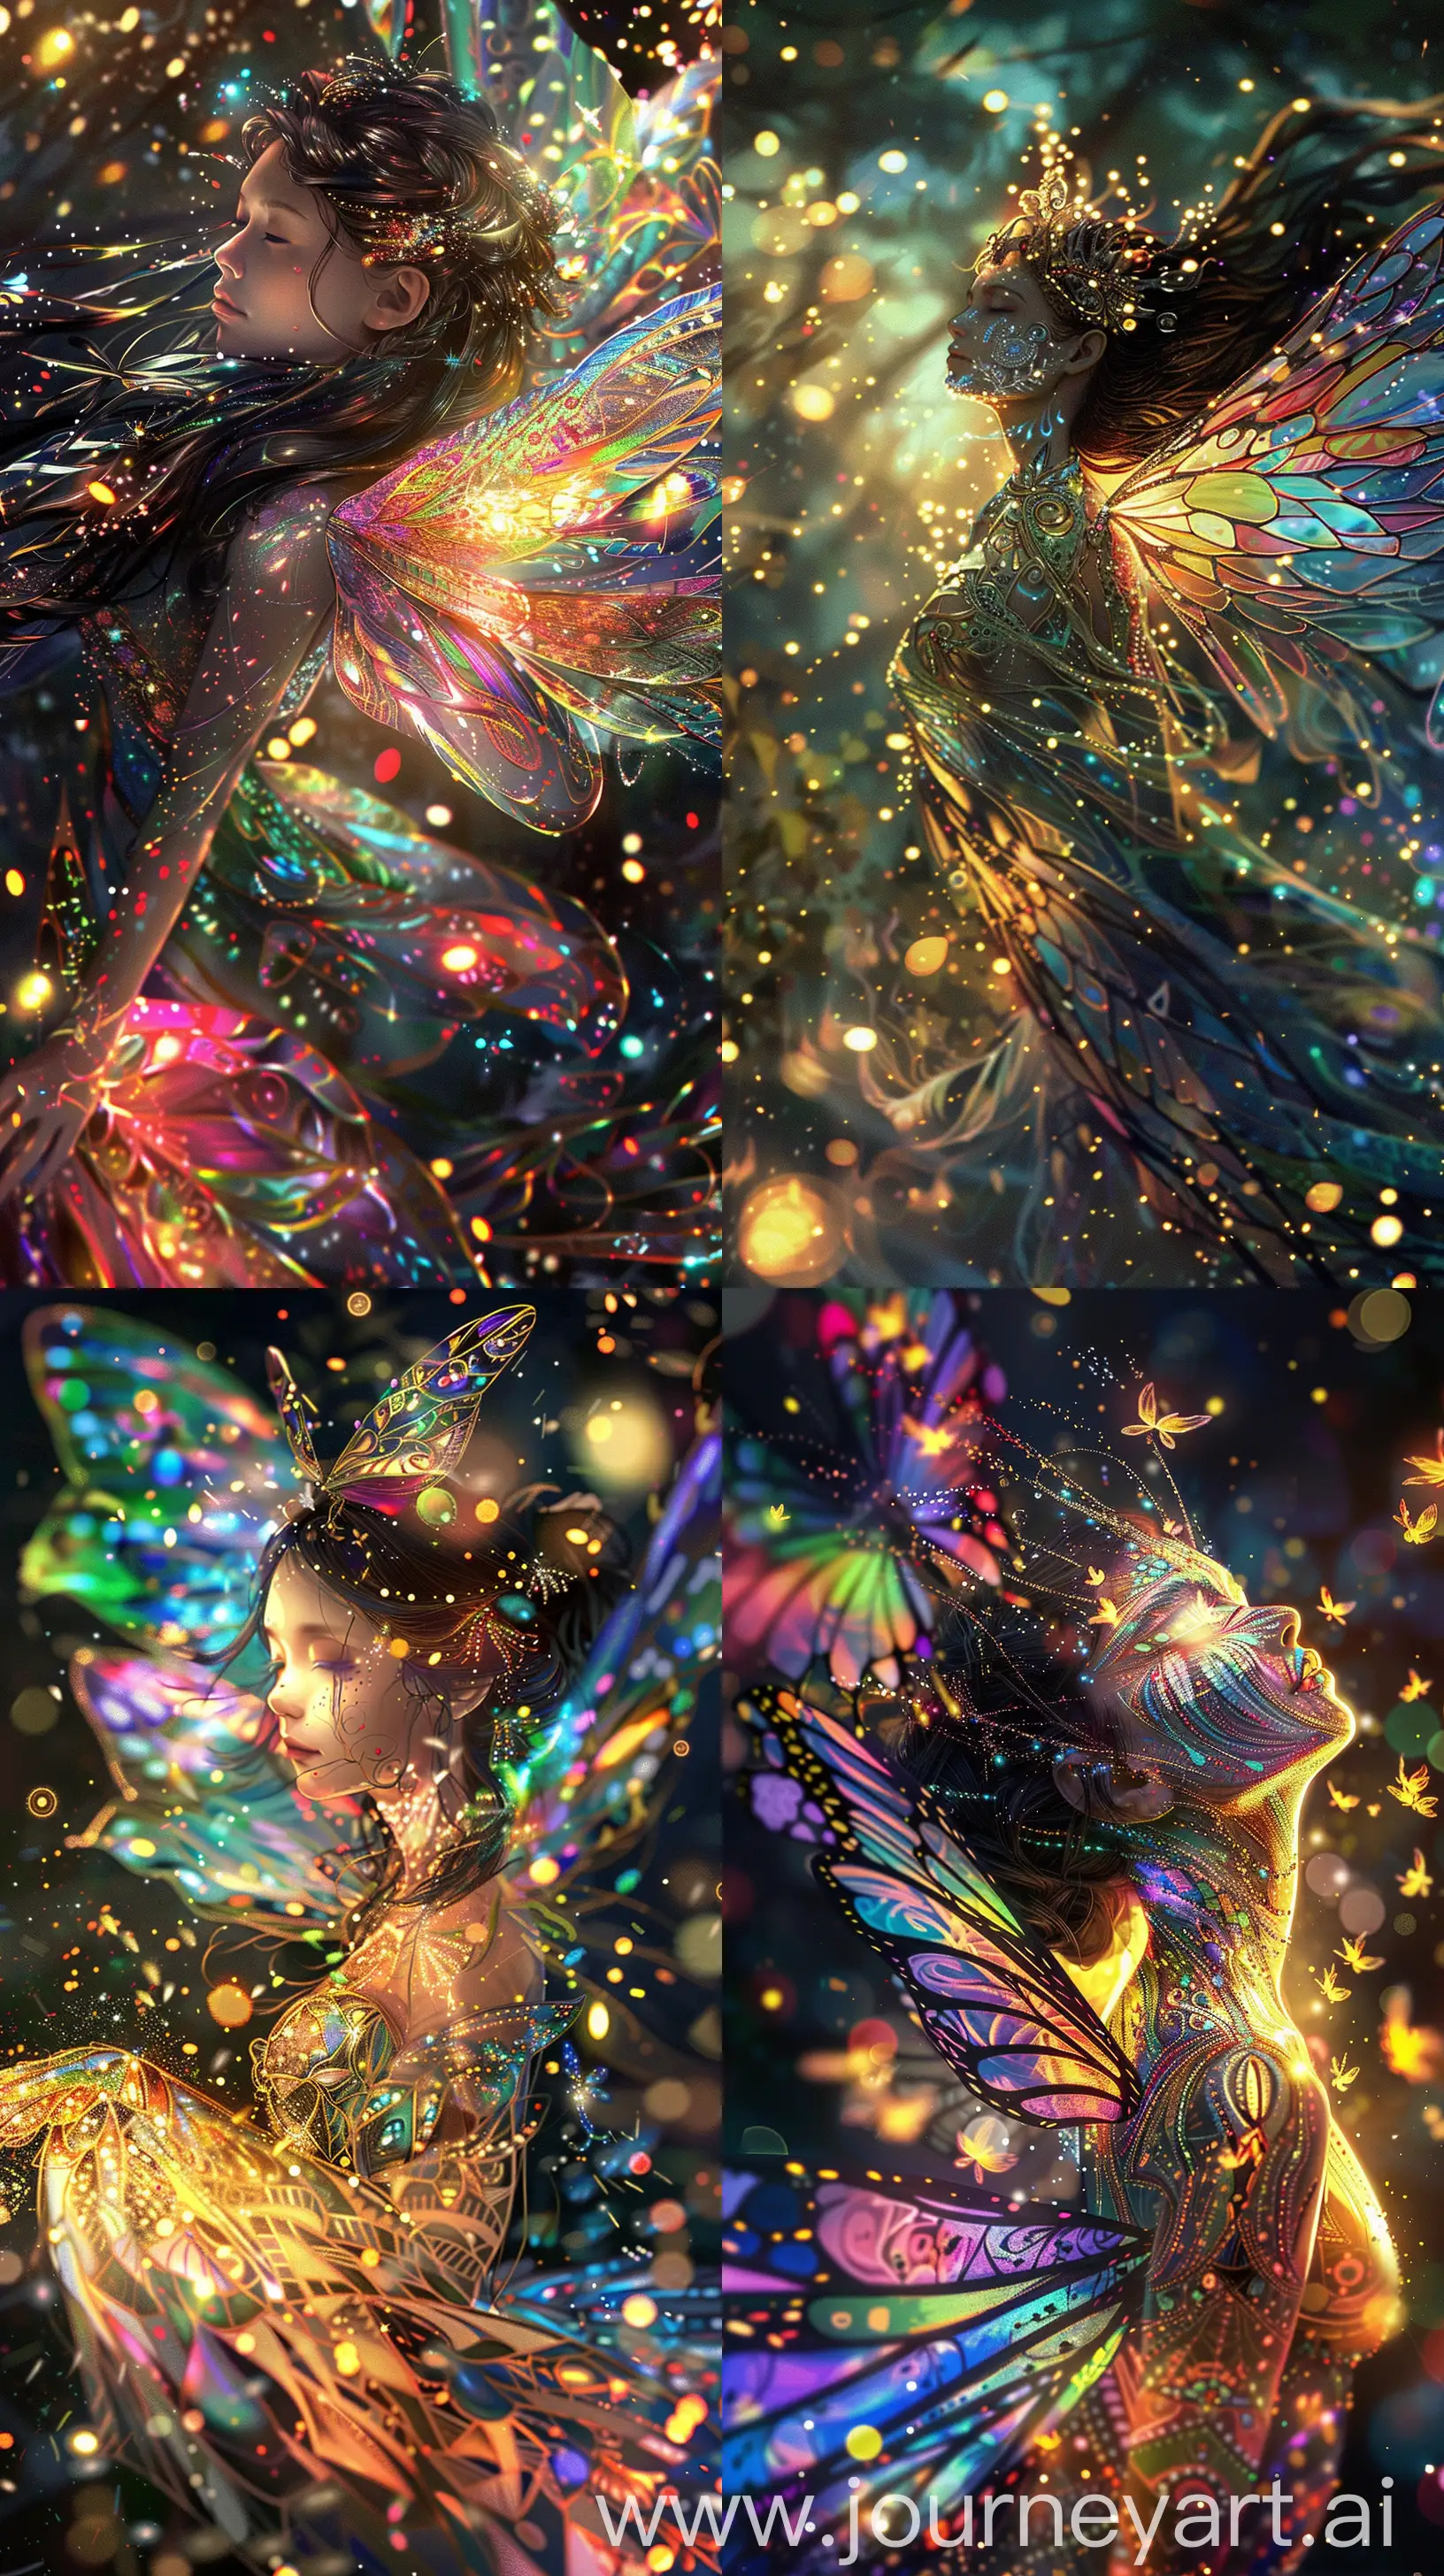 A luminous, ethereal nymph dances among sparkling fireflies, her skin shimmering with a rainbow of colors. She possesses an otherworldly beauty, with delicate wings adorned in intricate patterns. This enchanting scene is depicted in a digitally painted illustration, each brushstroke capturing the magical essence of the scene. The vivid colors and exquisite details make this image a truly mesmerizing piece of art. 8k --ar 9:16
